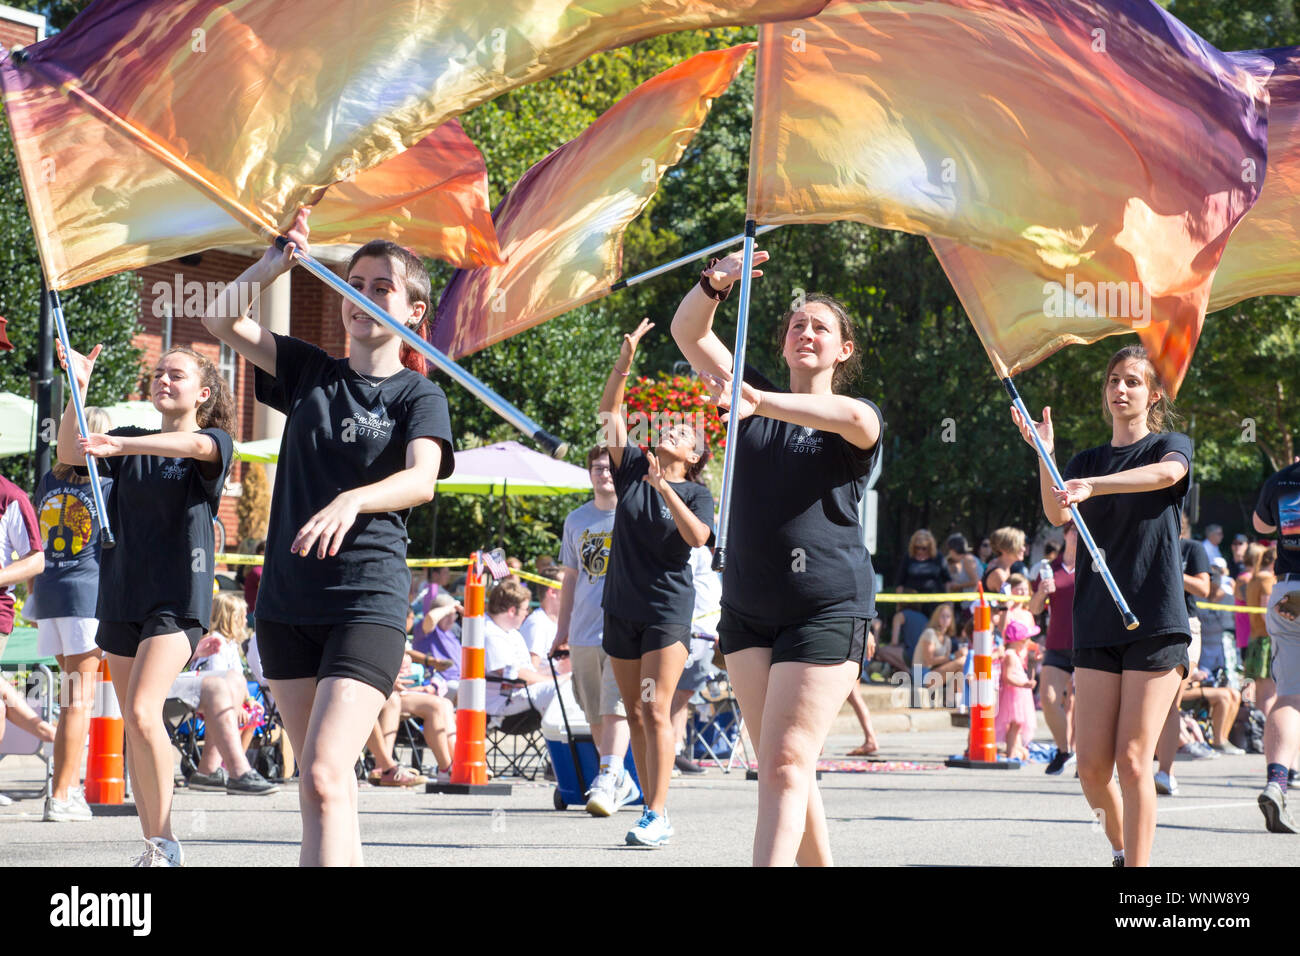 MATTHEWS, NC (USA) - August 31, 2019: High school marching flag wavers perform during the Labor Day parade held at the annual 'Matthews Alive' communi Stock Photo